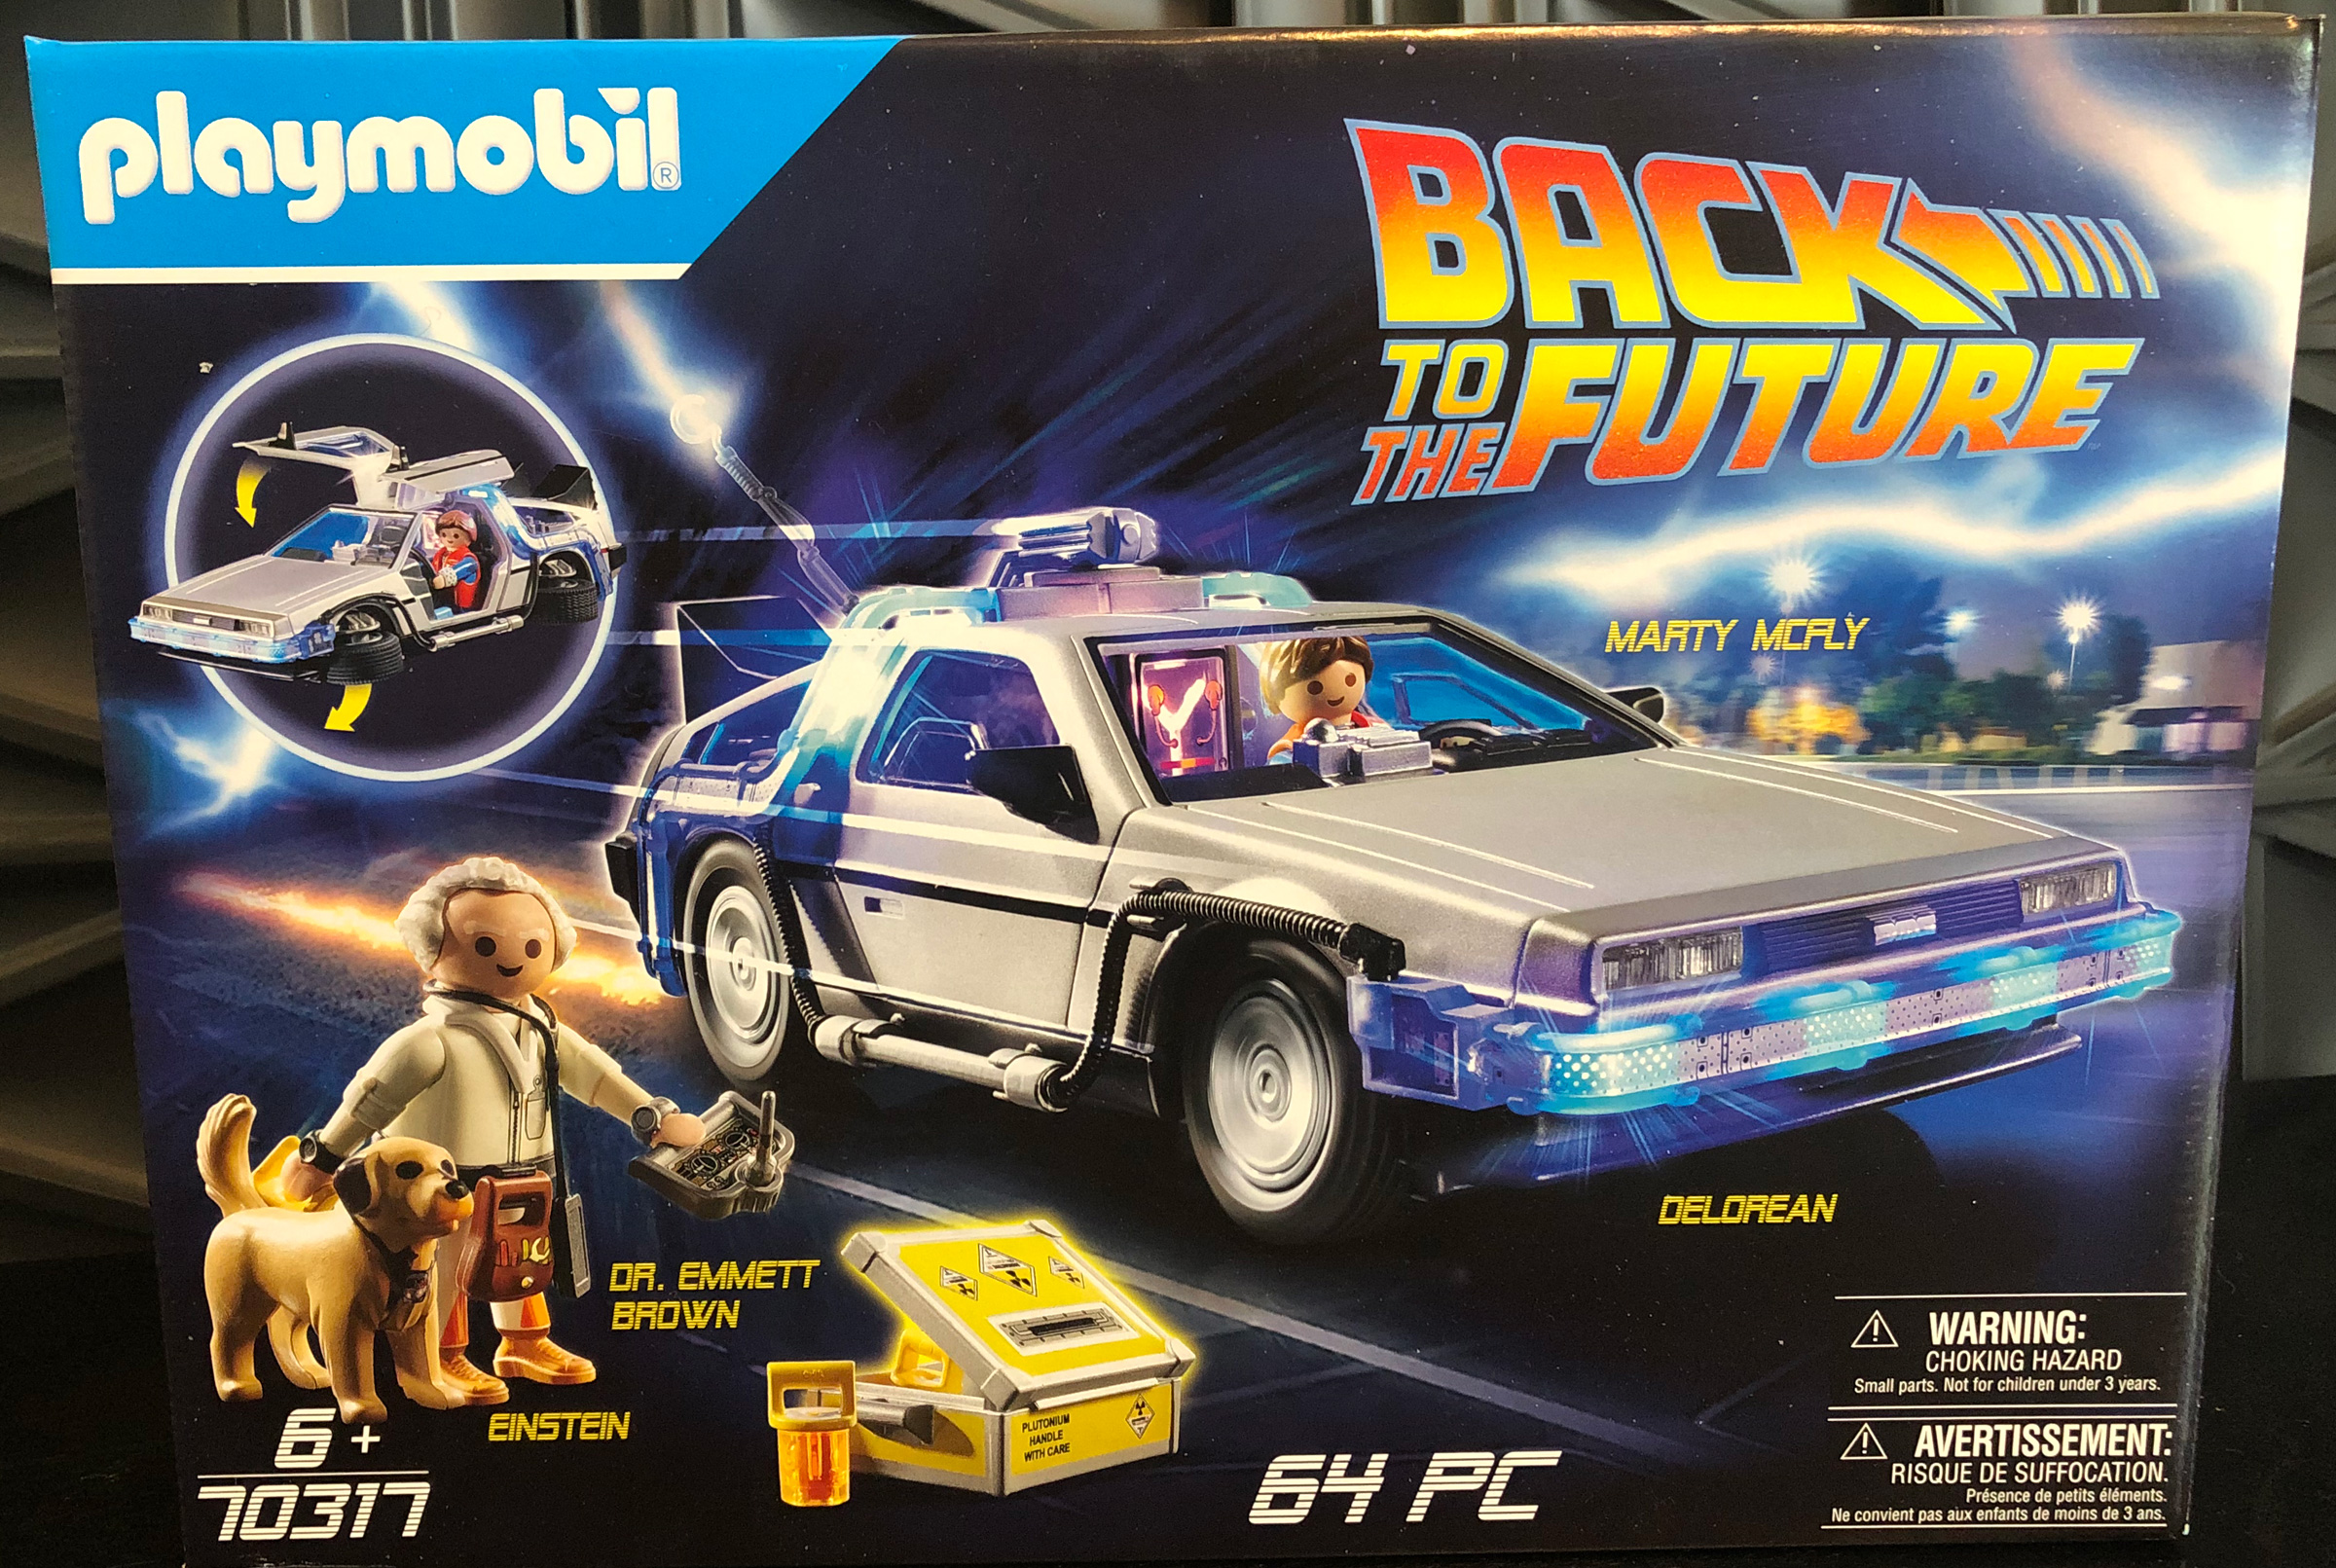 Playmobil BACK TO THE FUTURE - All videos, commercials, TV spots 